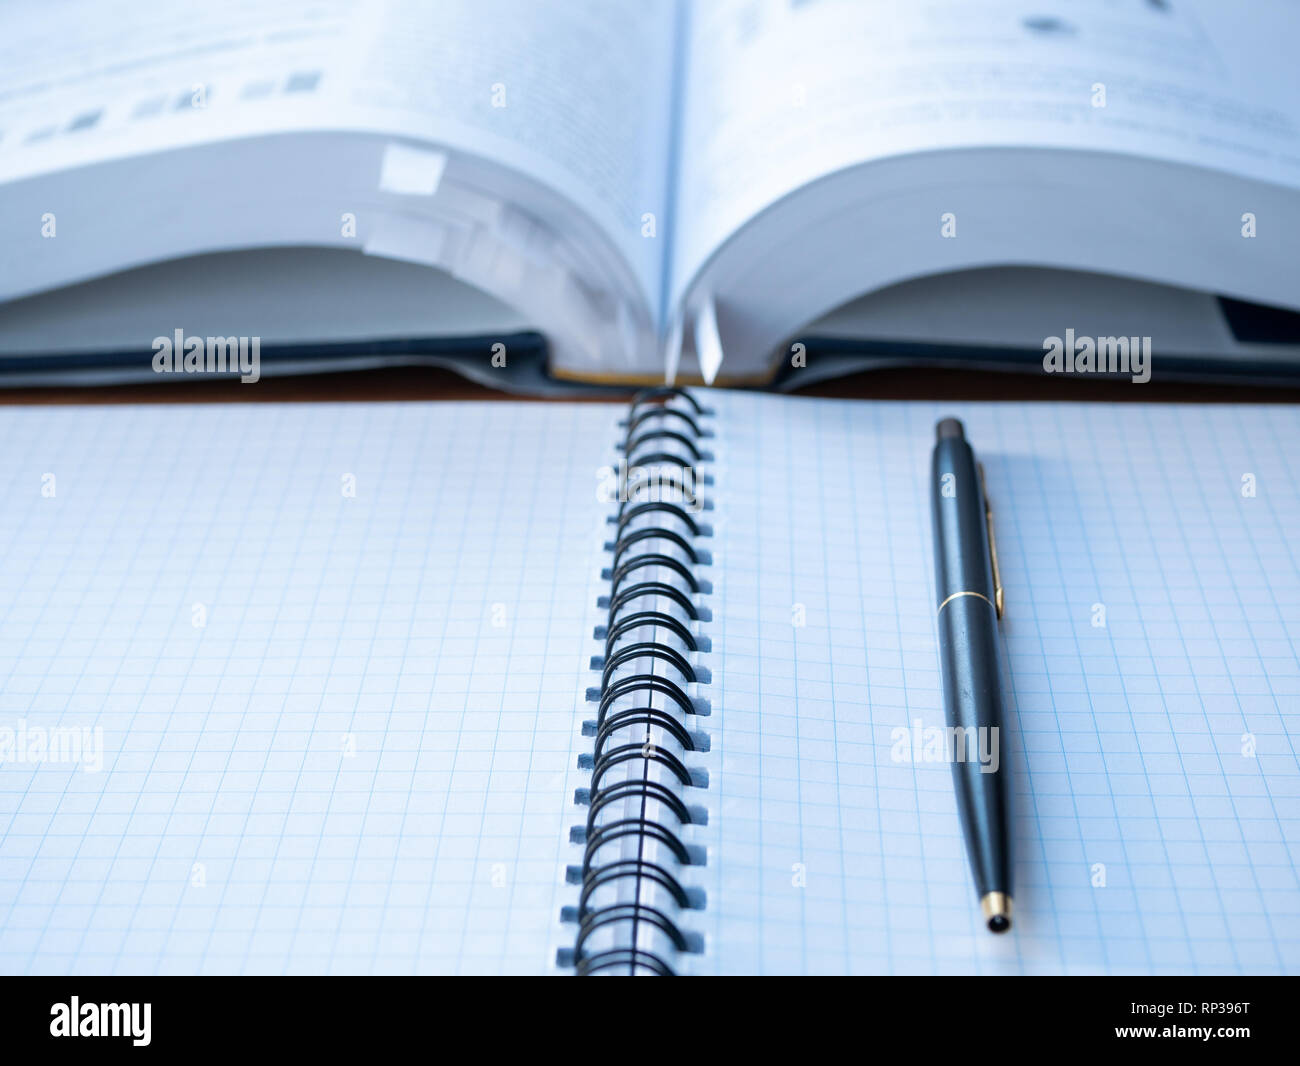 empty student notebook squared with pen and blurred book with lot of bookmarks as background. closeup image depict education process Stock Photo